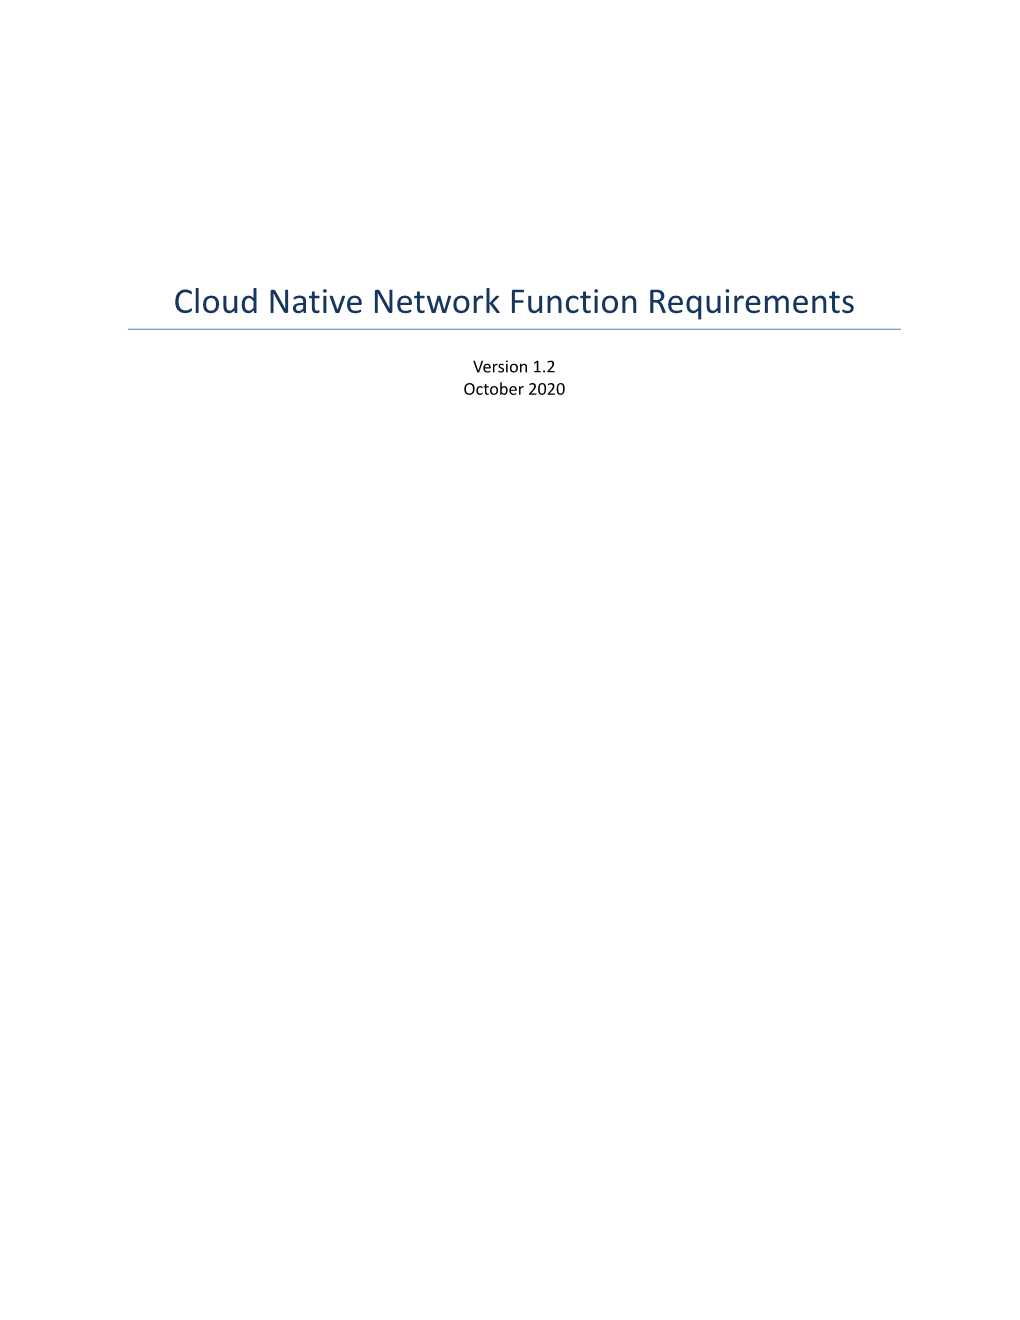 Cloud Native Network Function Requirements